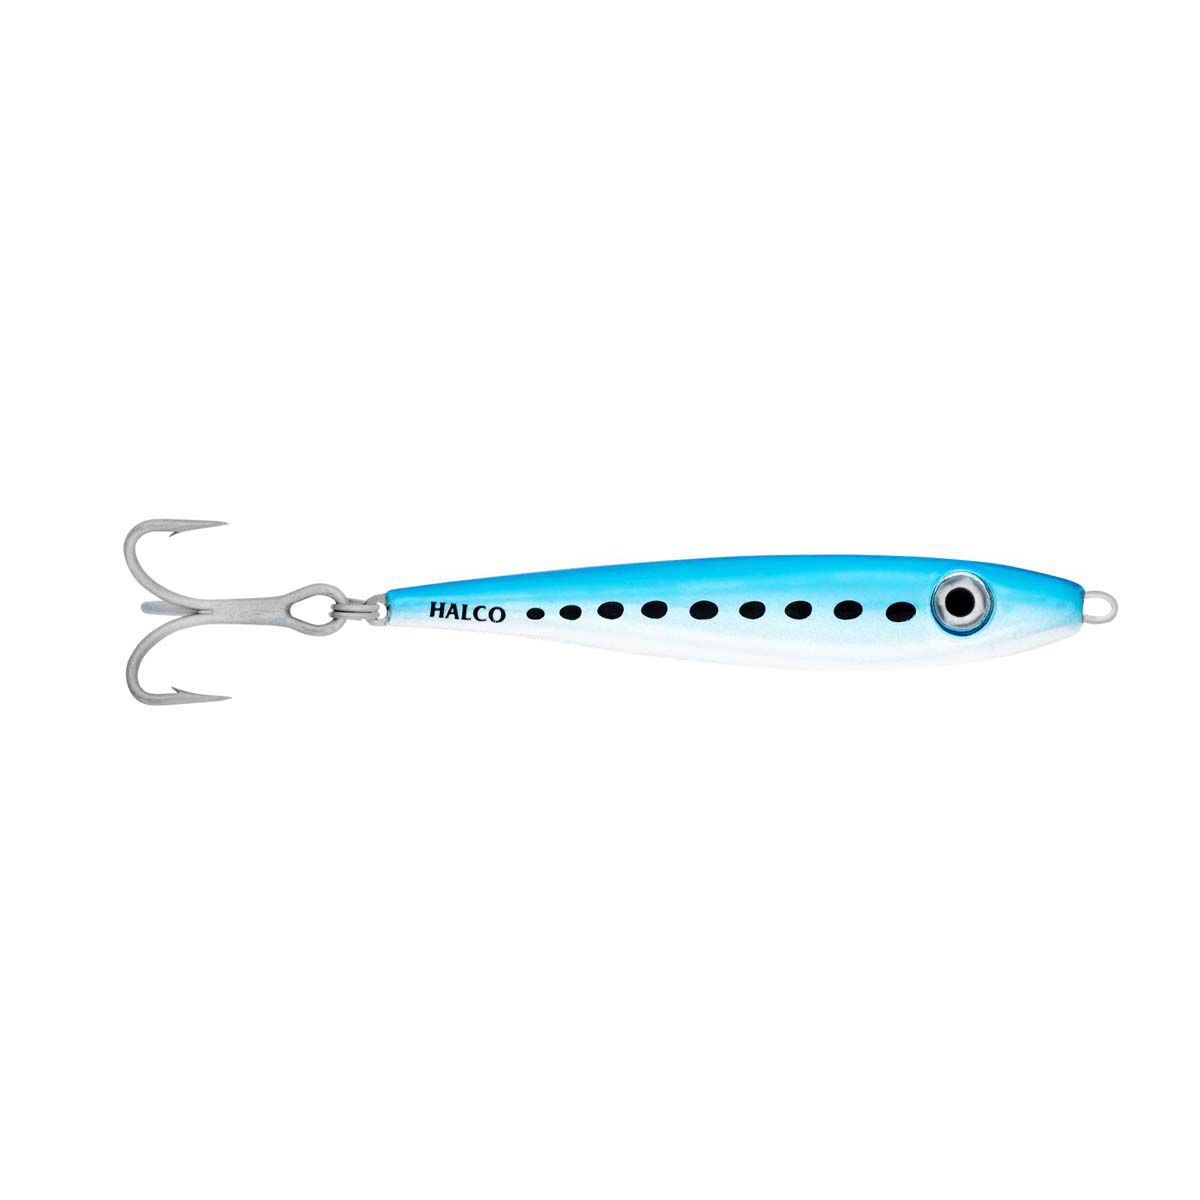 M80 Metal Lip Swimmer lure making kits from Saltys